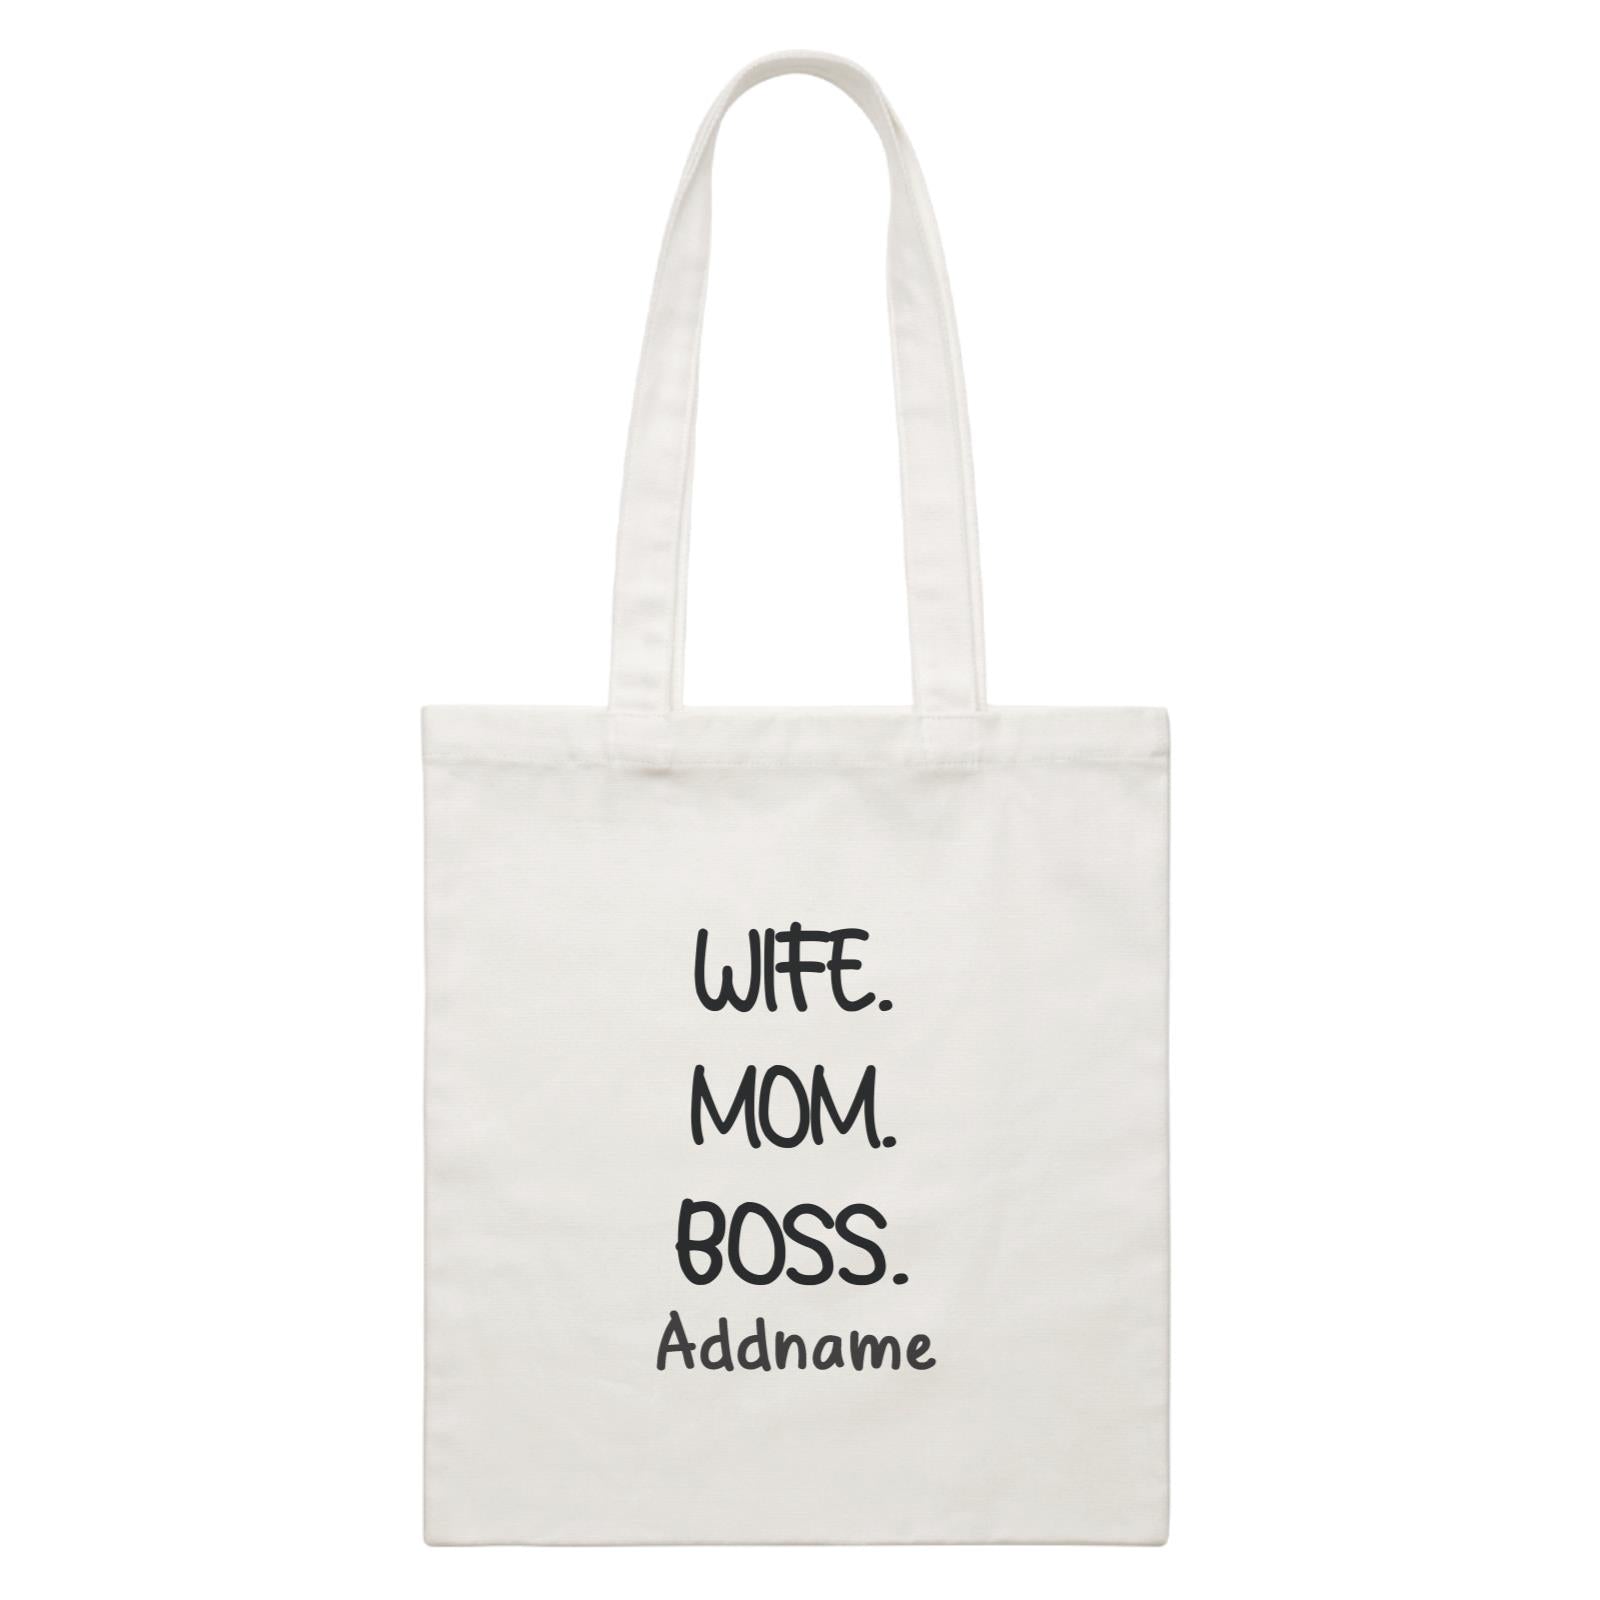 Girl Boss Quotes Cute Typefont Wife Mom Boss Addname White Canvas Bag